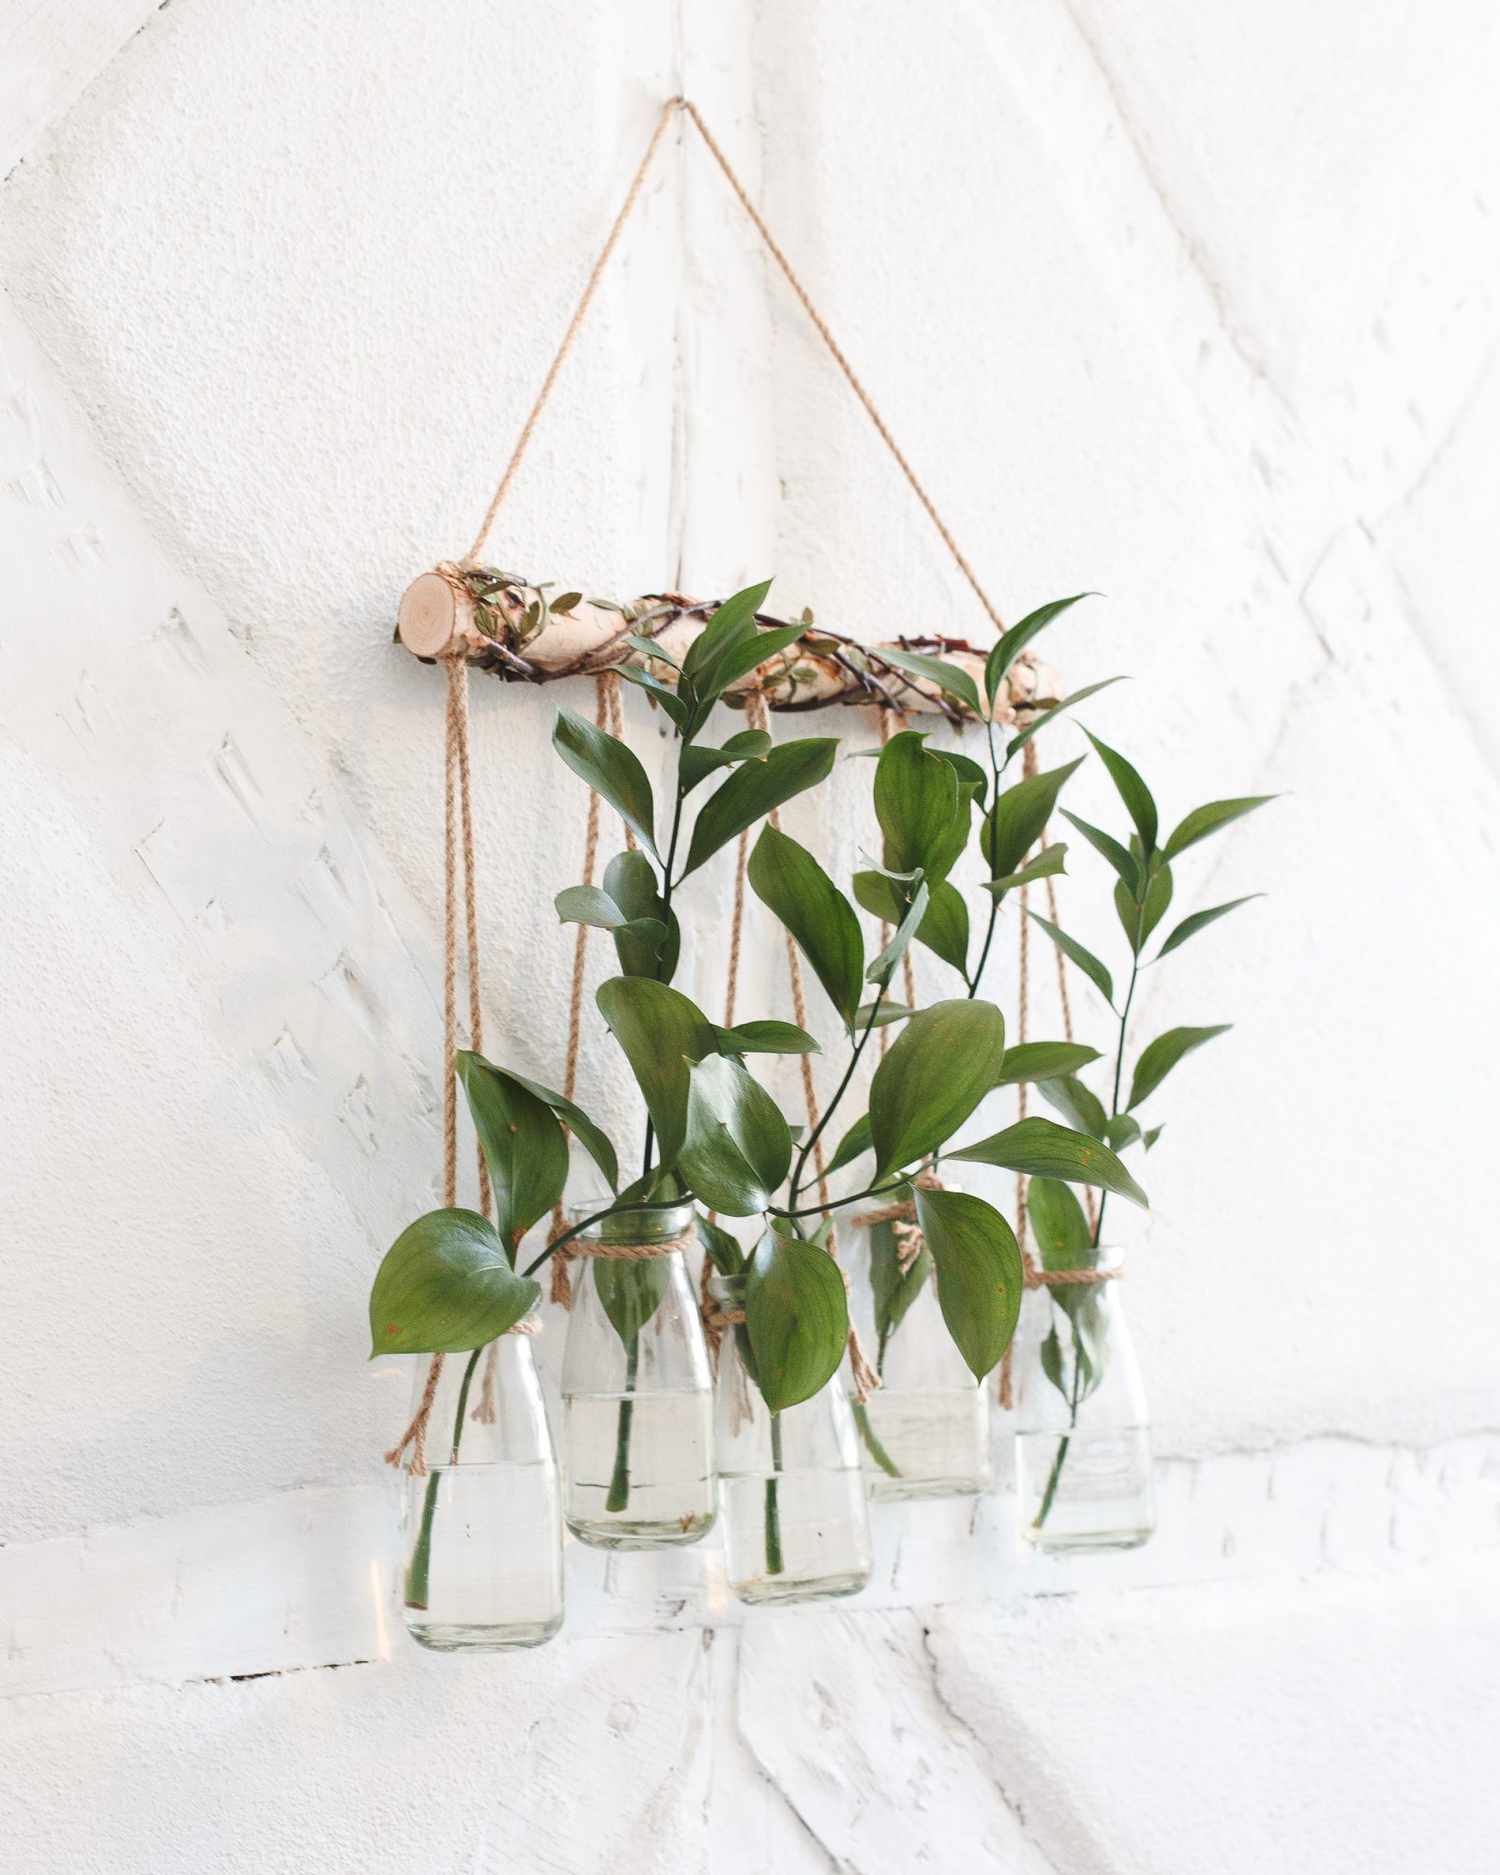 Unique Air Plant Hanging Basket For Wall